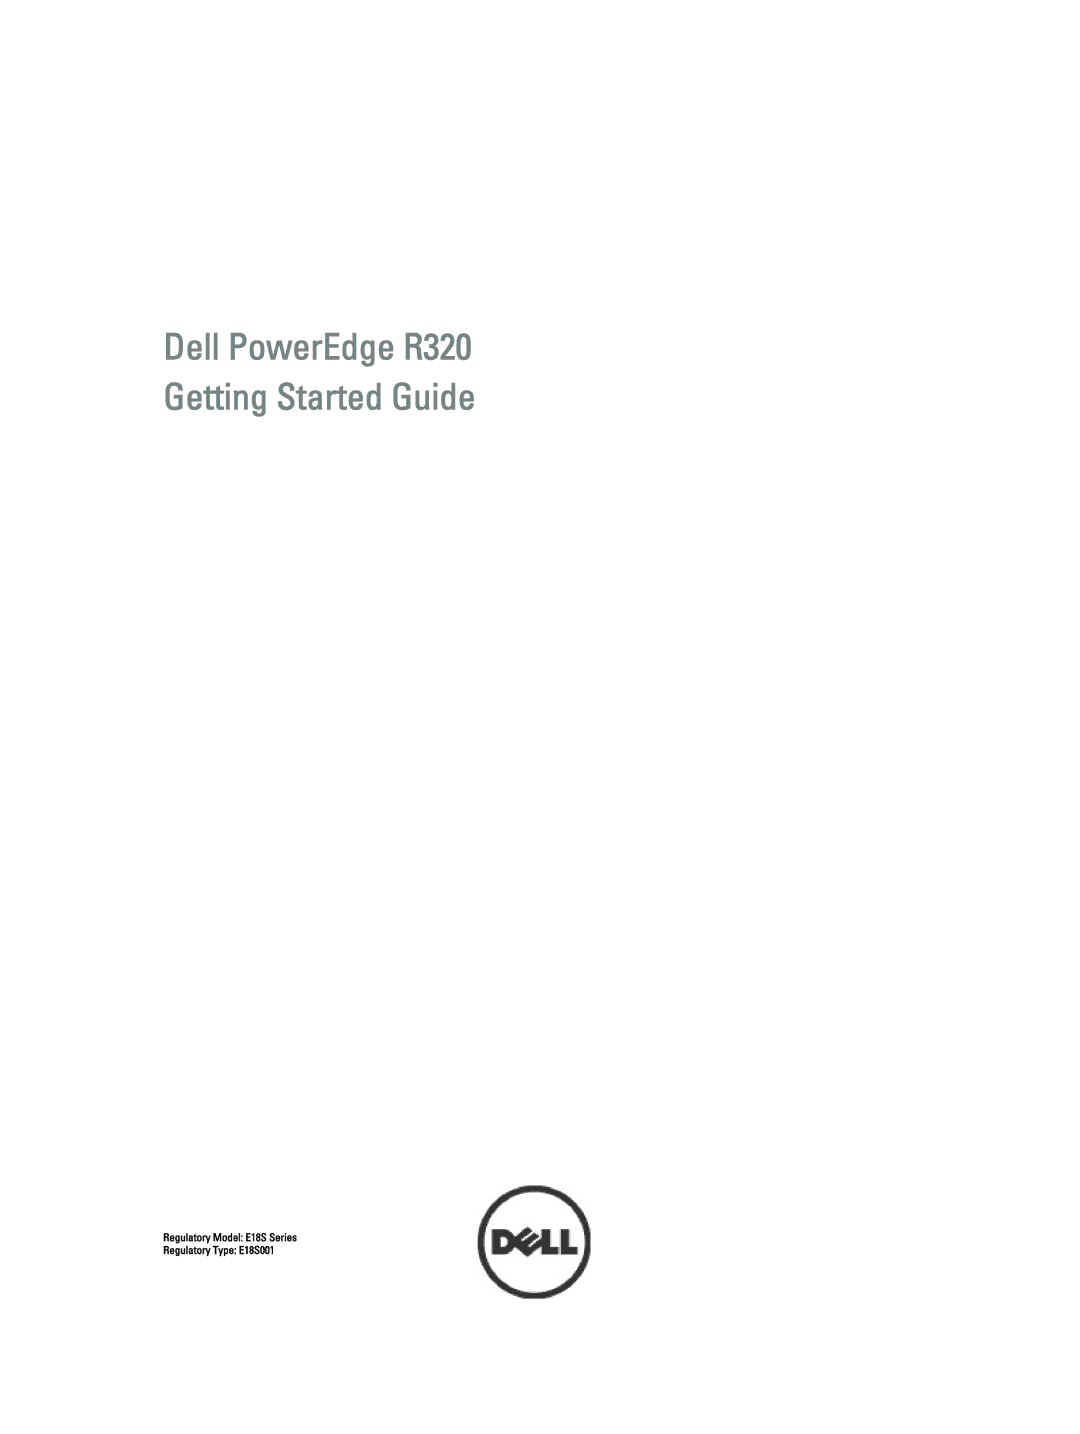 Dell manual Dell PowerEdge R320 Getting Started Guide 